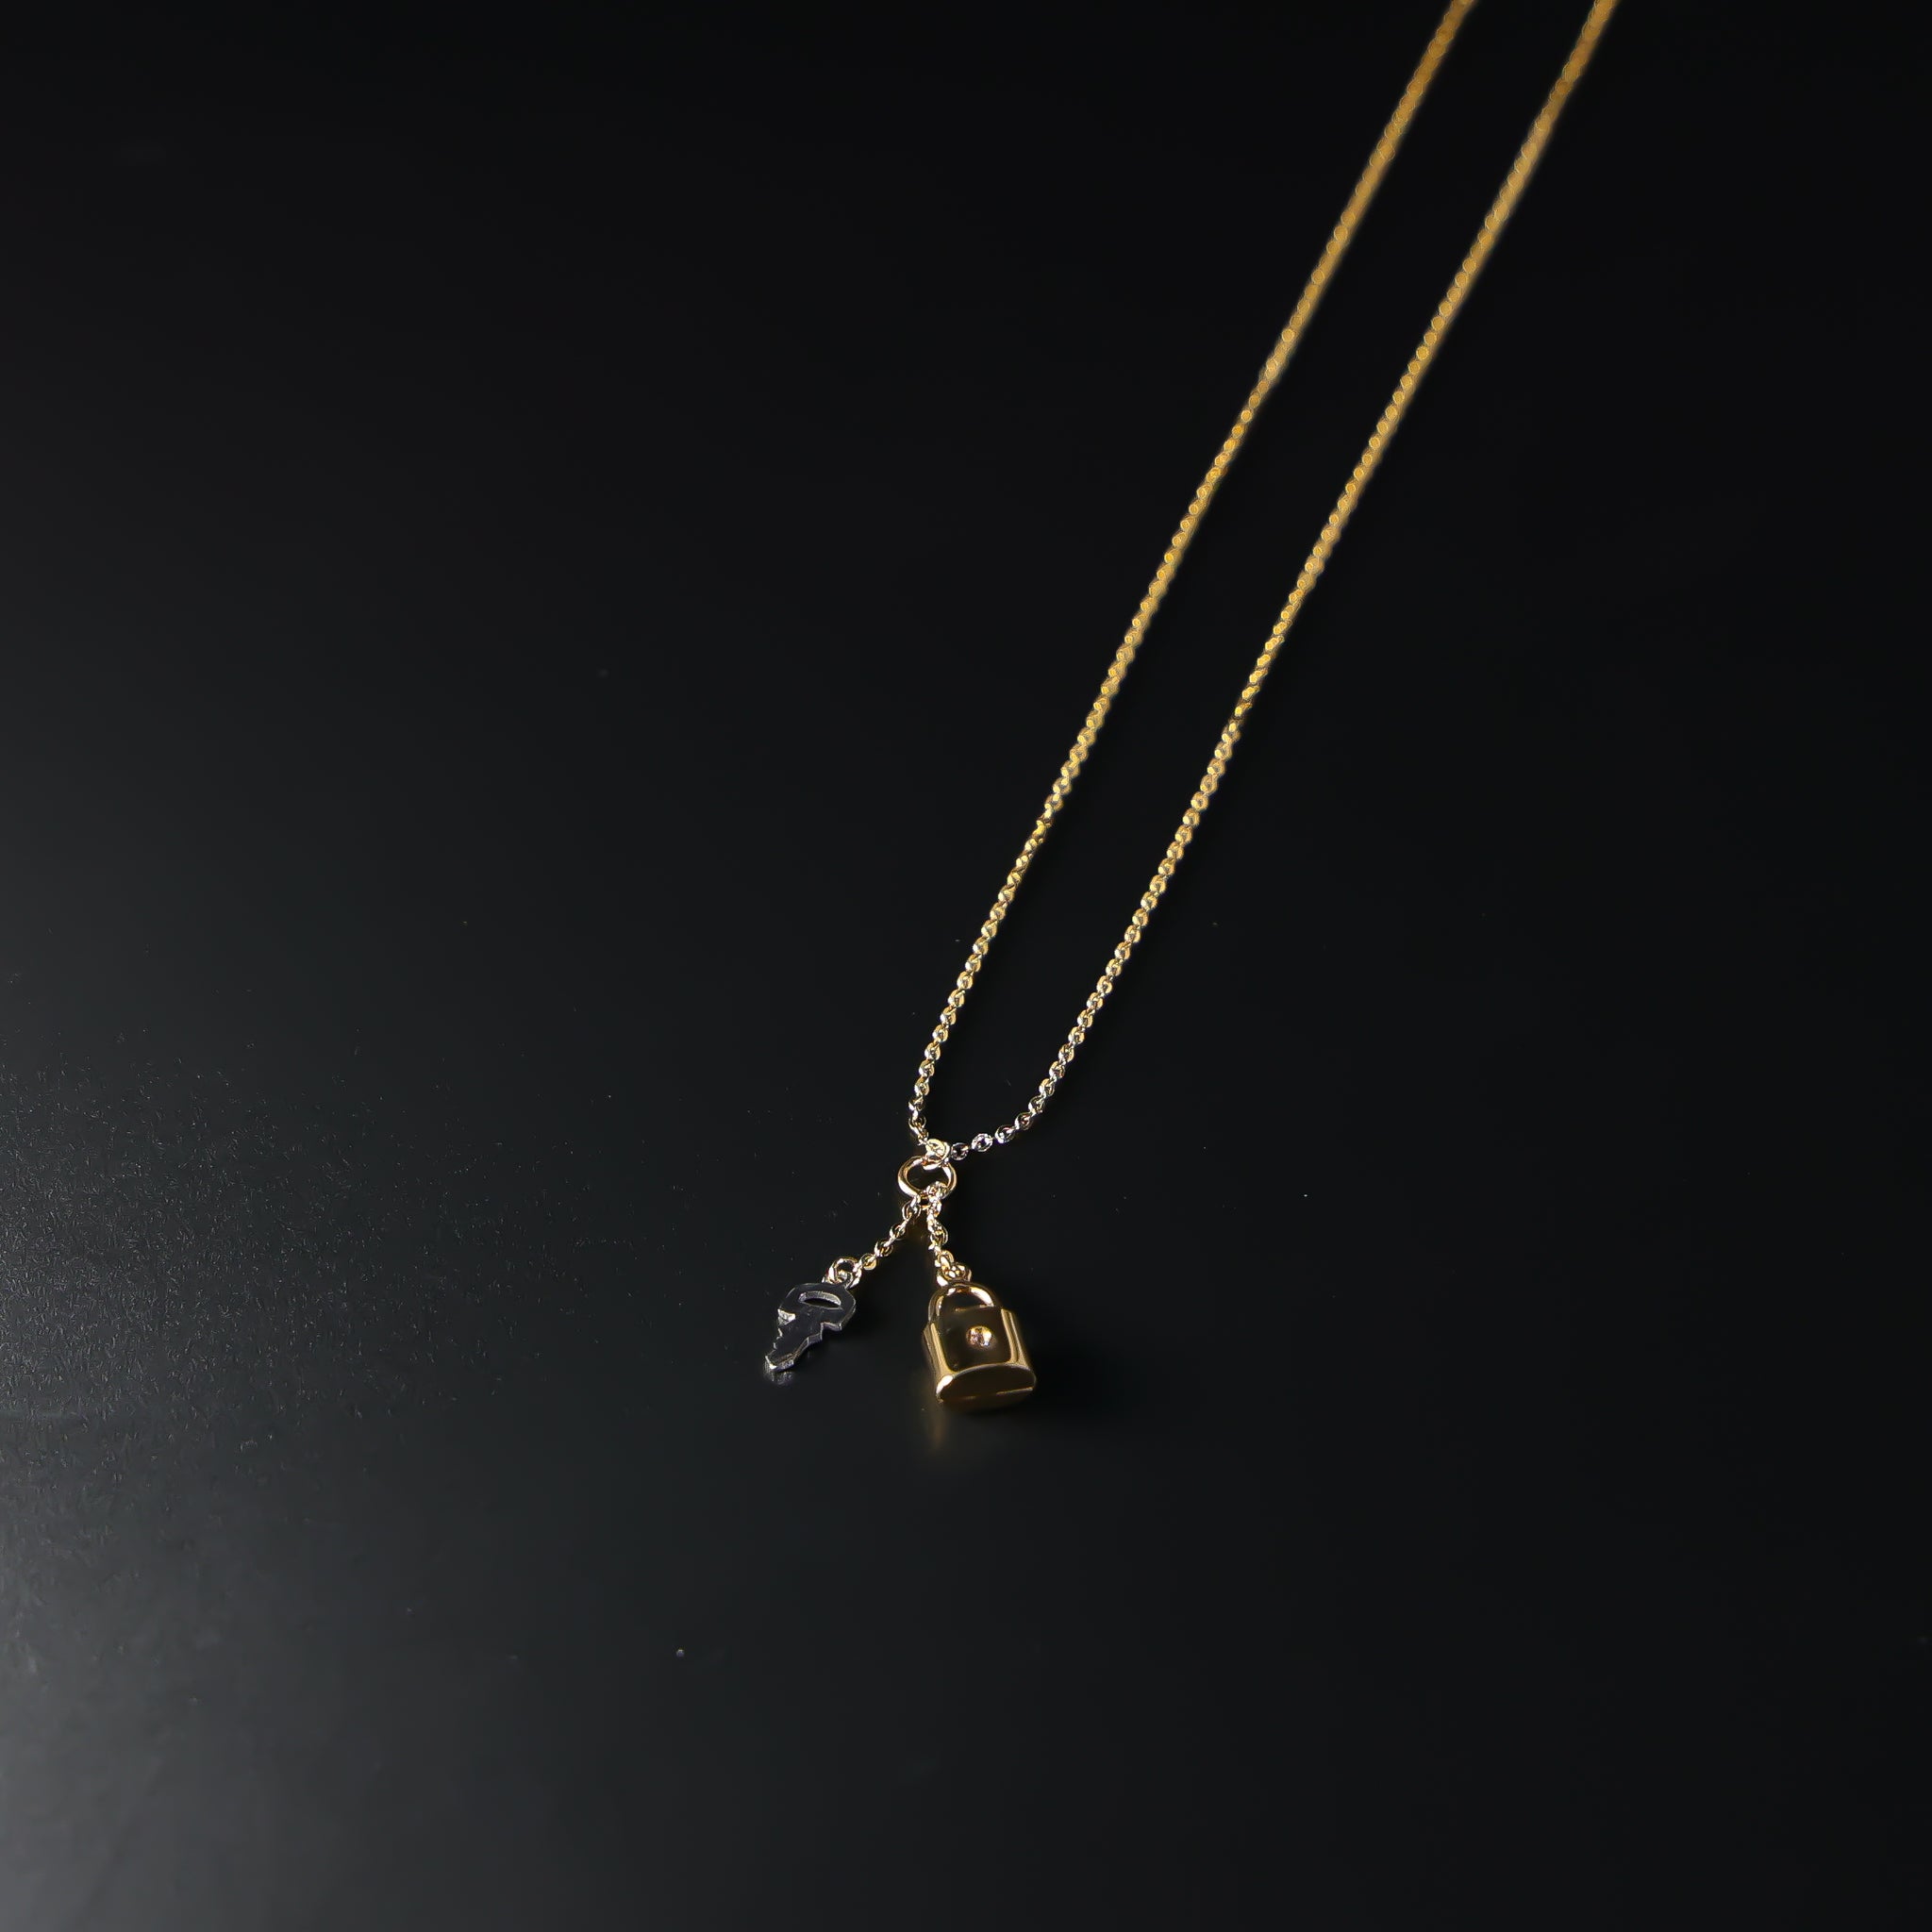 Gold Lock And Key Charm Necklace Model-NK0223 - Charlie & Co. Jewelry